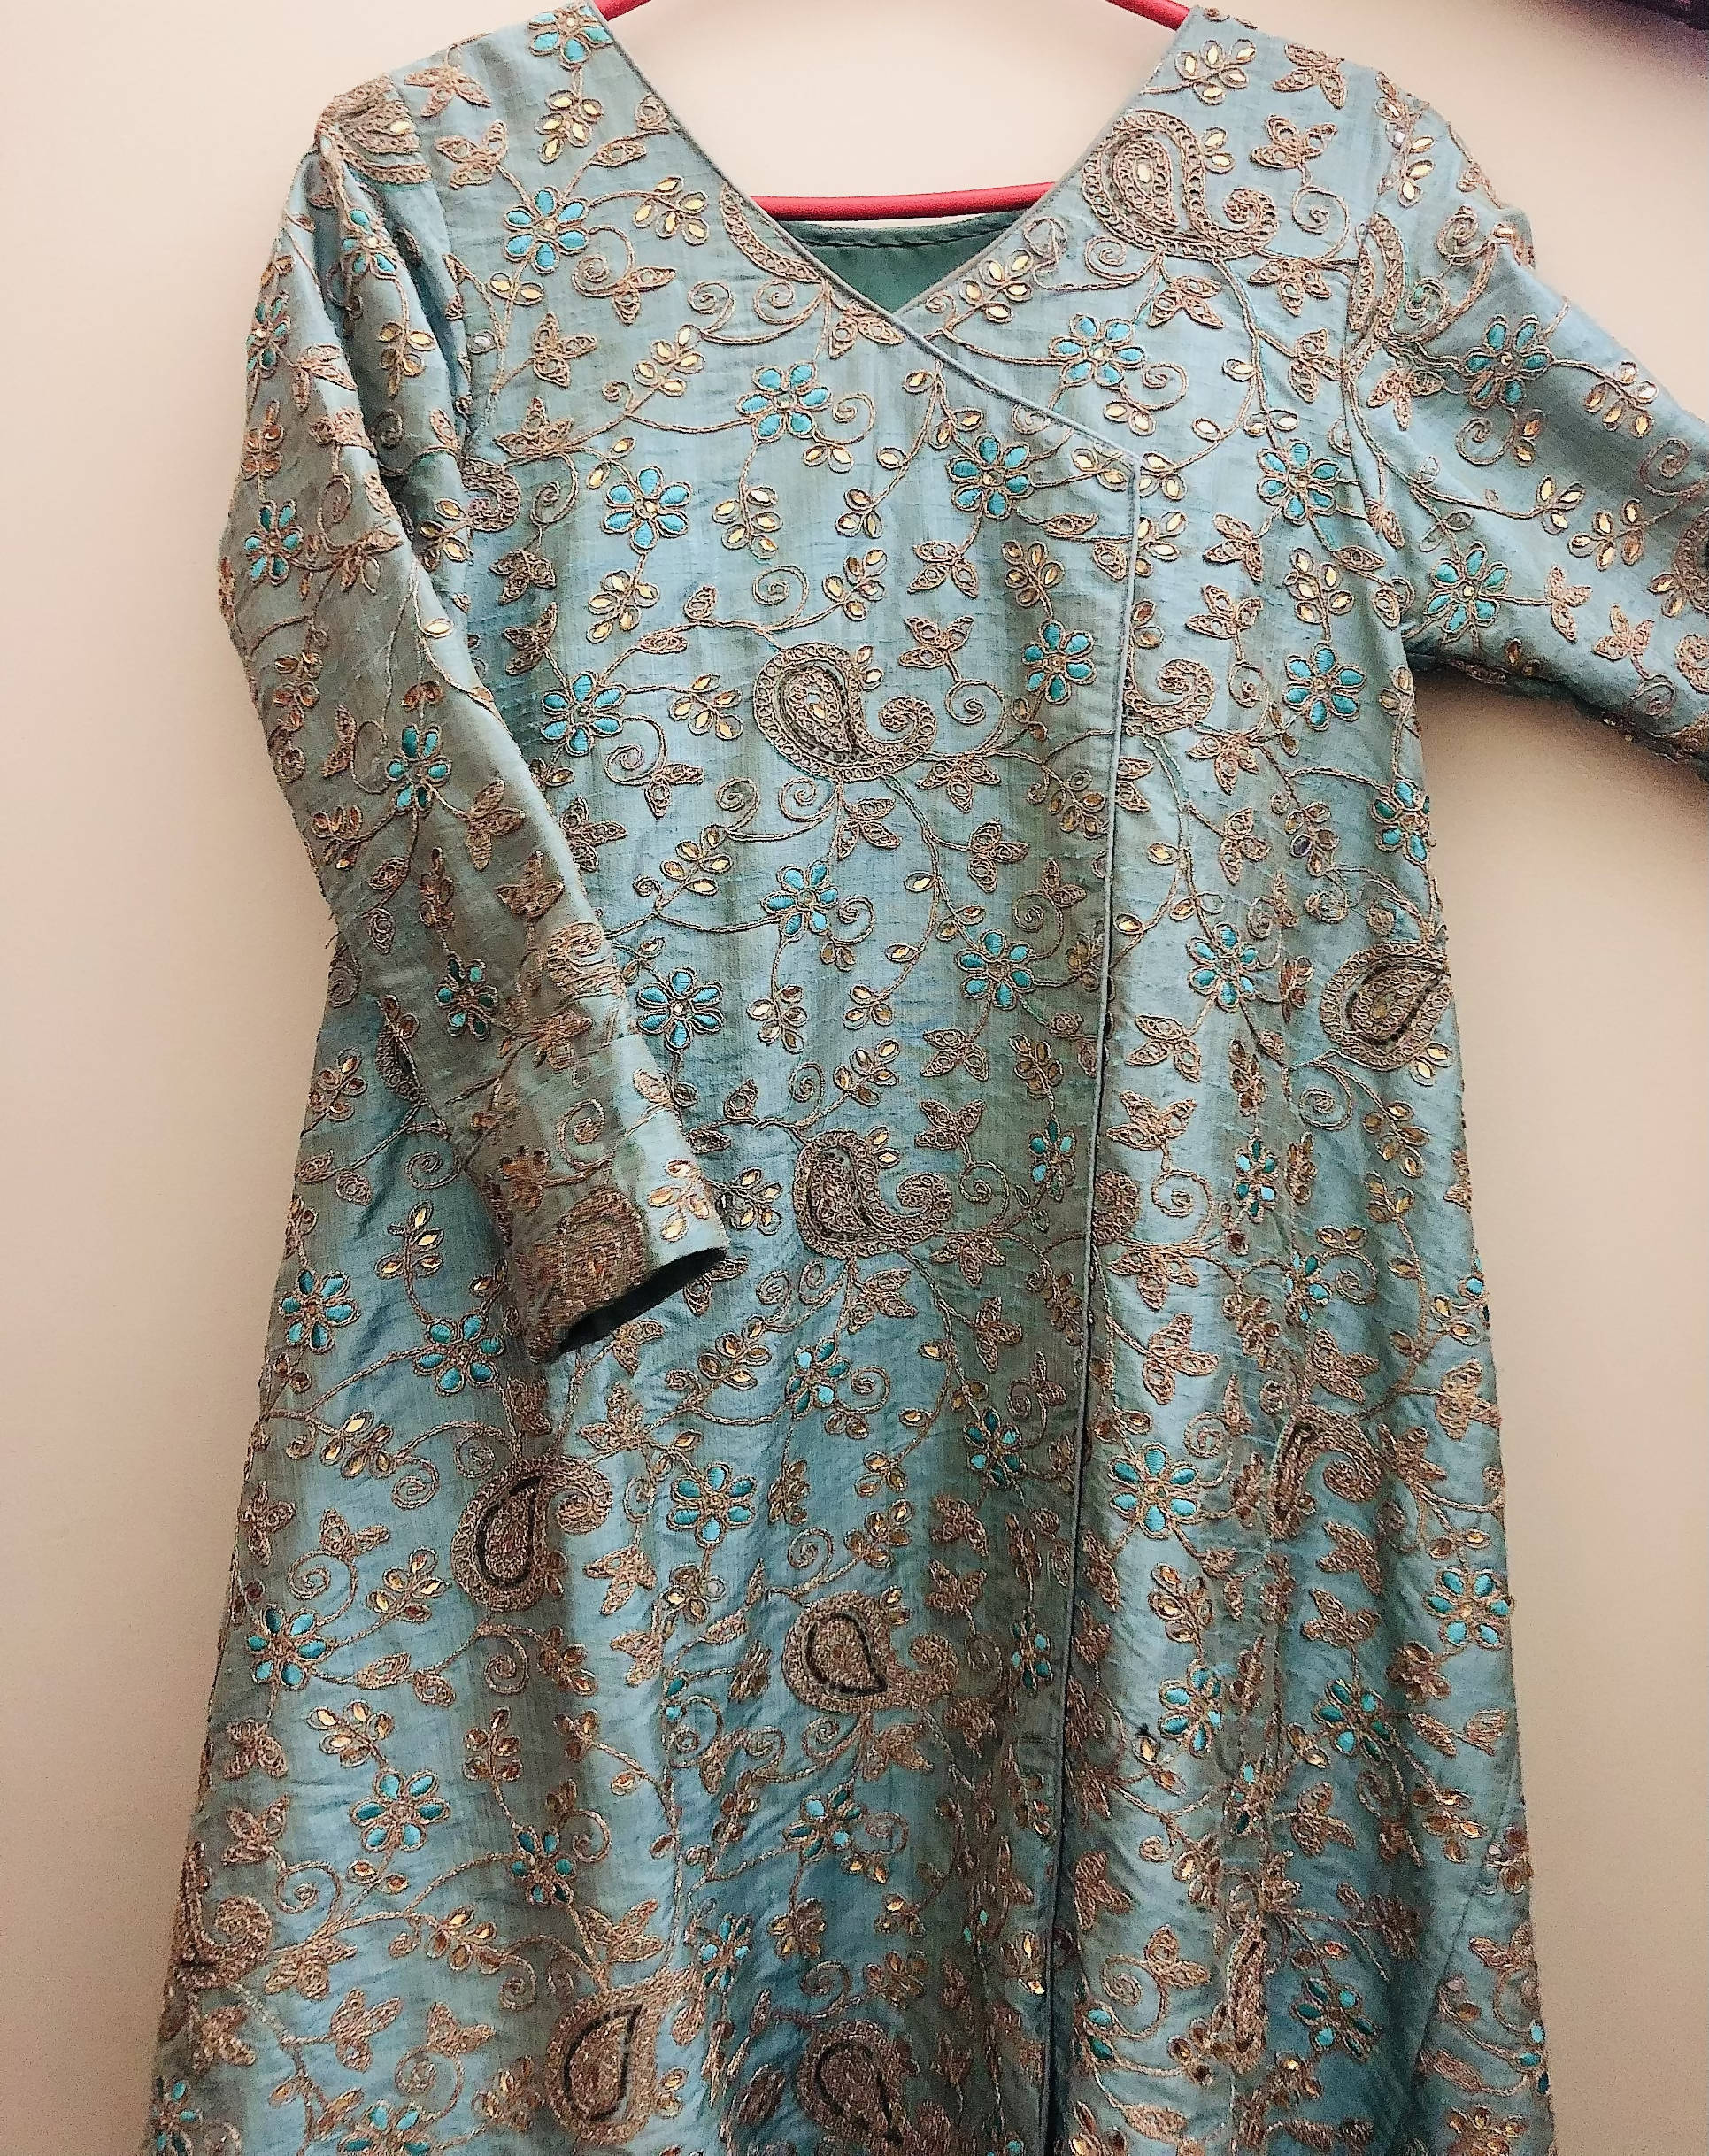 ANRAKHA | Stunning Embroidered 3 Piece Suit | Women Locally Made Formals | Preloved